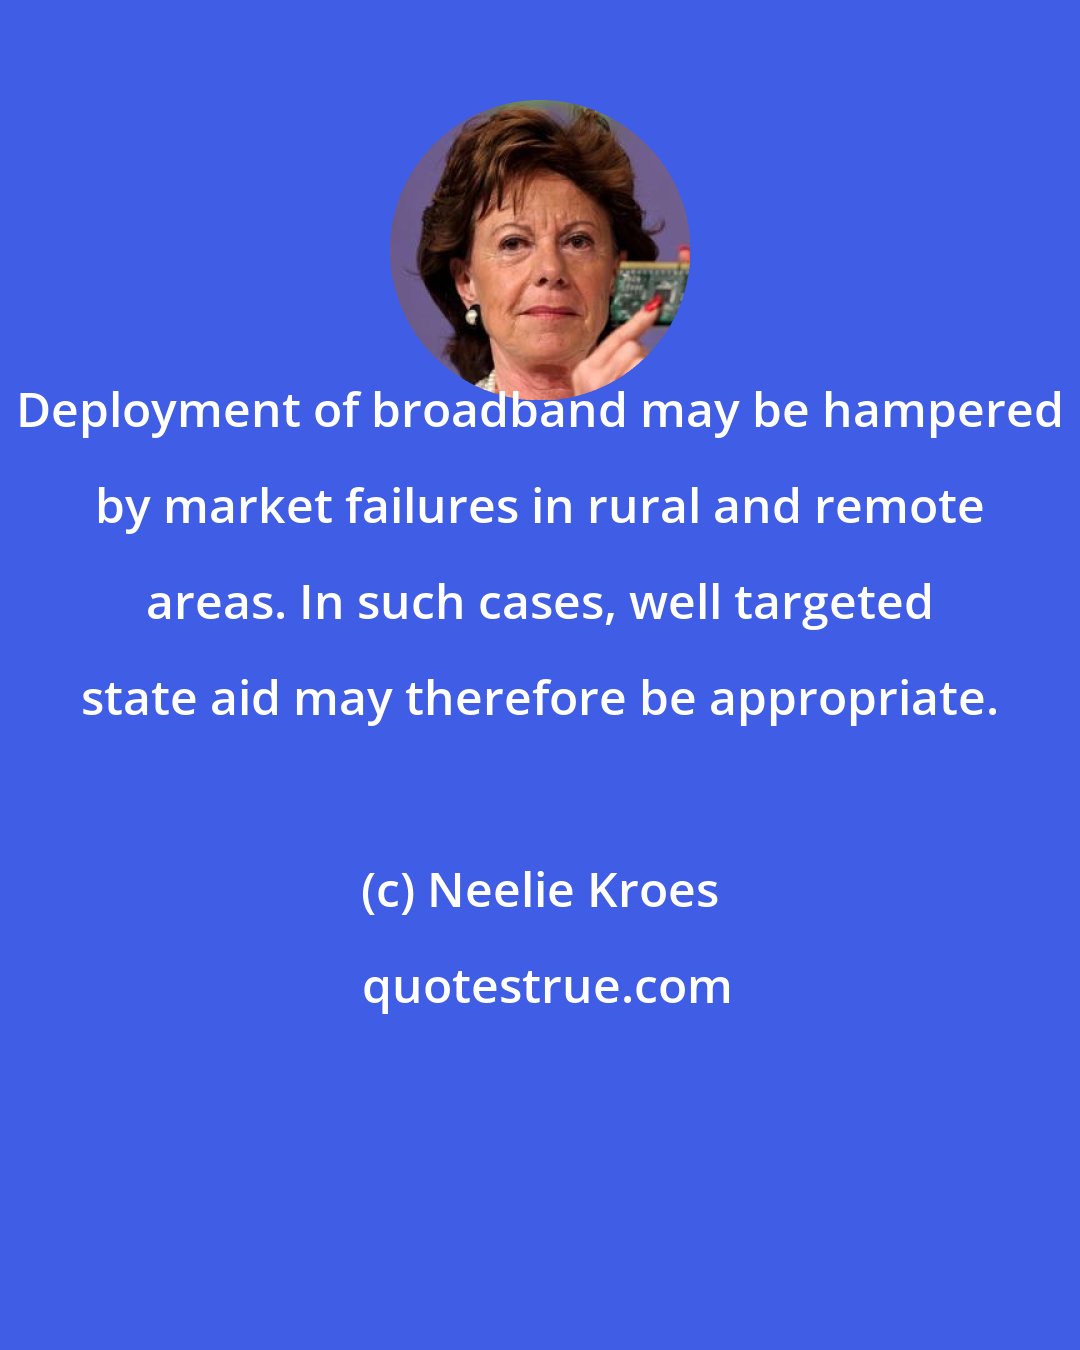 Neelie Kroes: Deployment of broadband may be hampered by market failures in rural and remote areas. In such cases, well targeted state aid may therefore be appropriate.